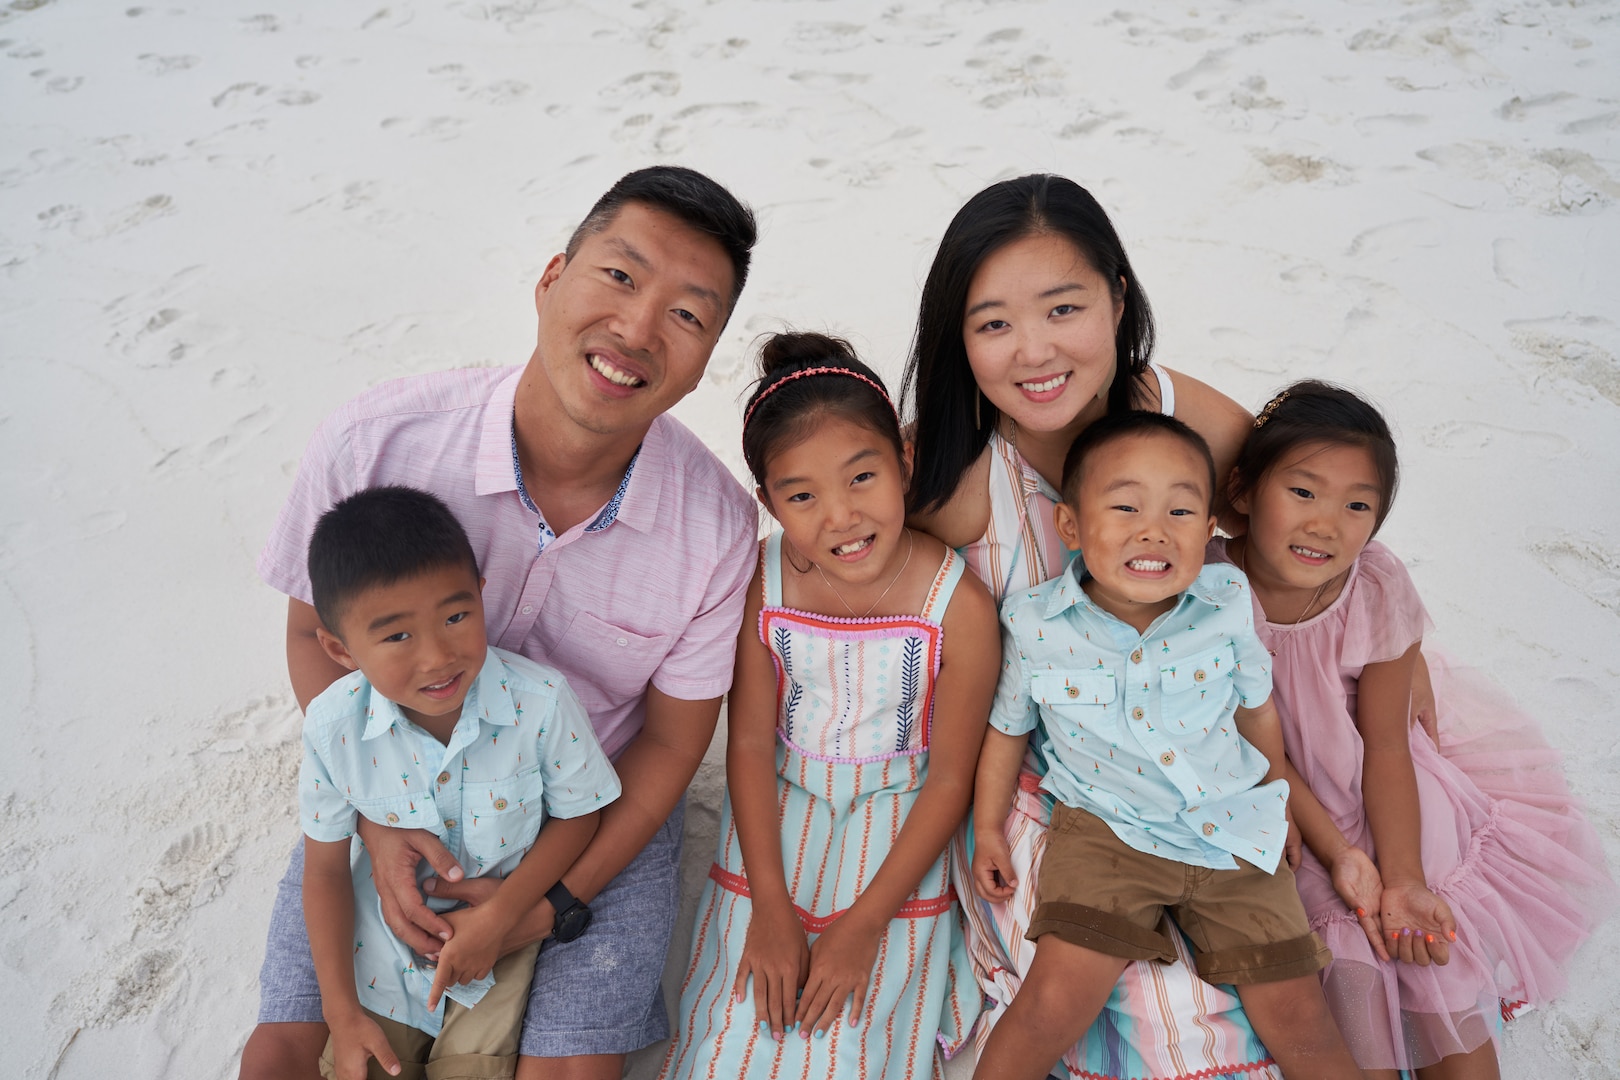 Maj. Jay Park, director of operations for Air Force Recruiting Service’s Detachment 1, and his wife, Anna, and their children. Park’s parents along immigrated to the U.S. when he was an 8 year old.